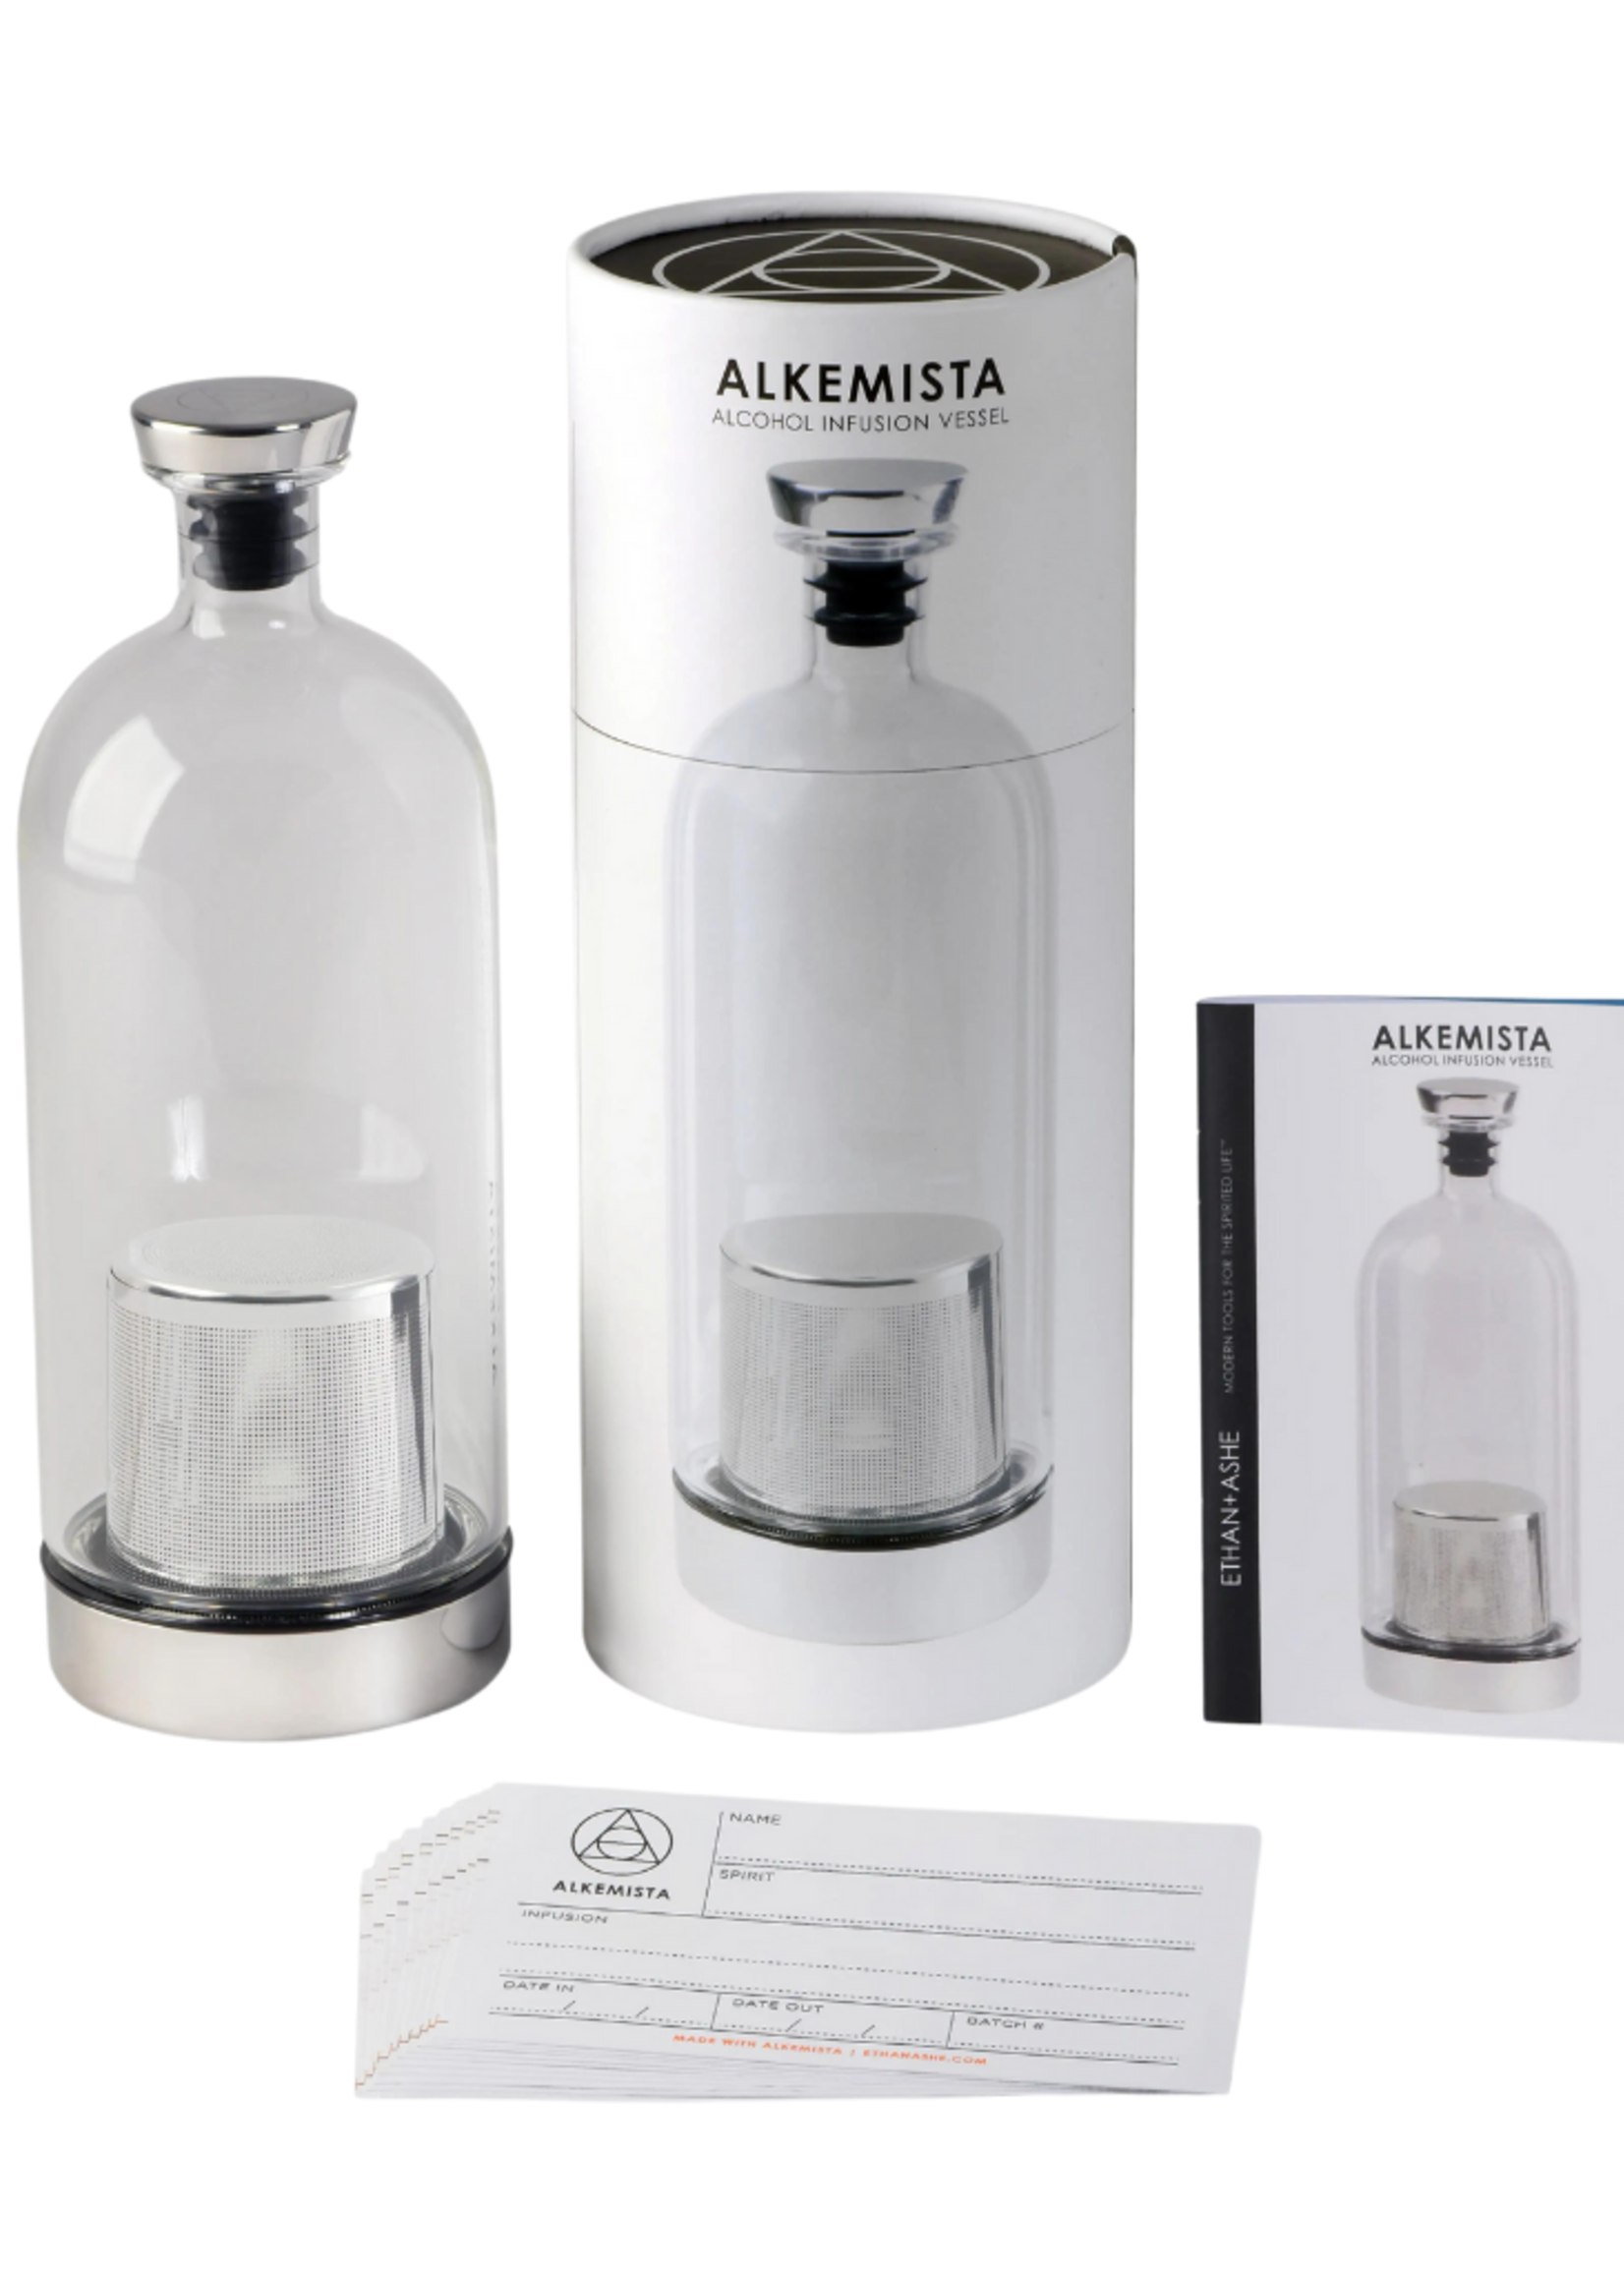 Ethan+Ashe Stainless Steel Alkemista Infusion Vessel